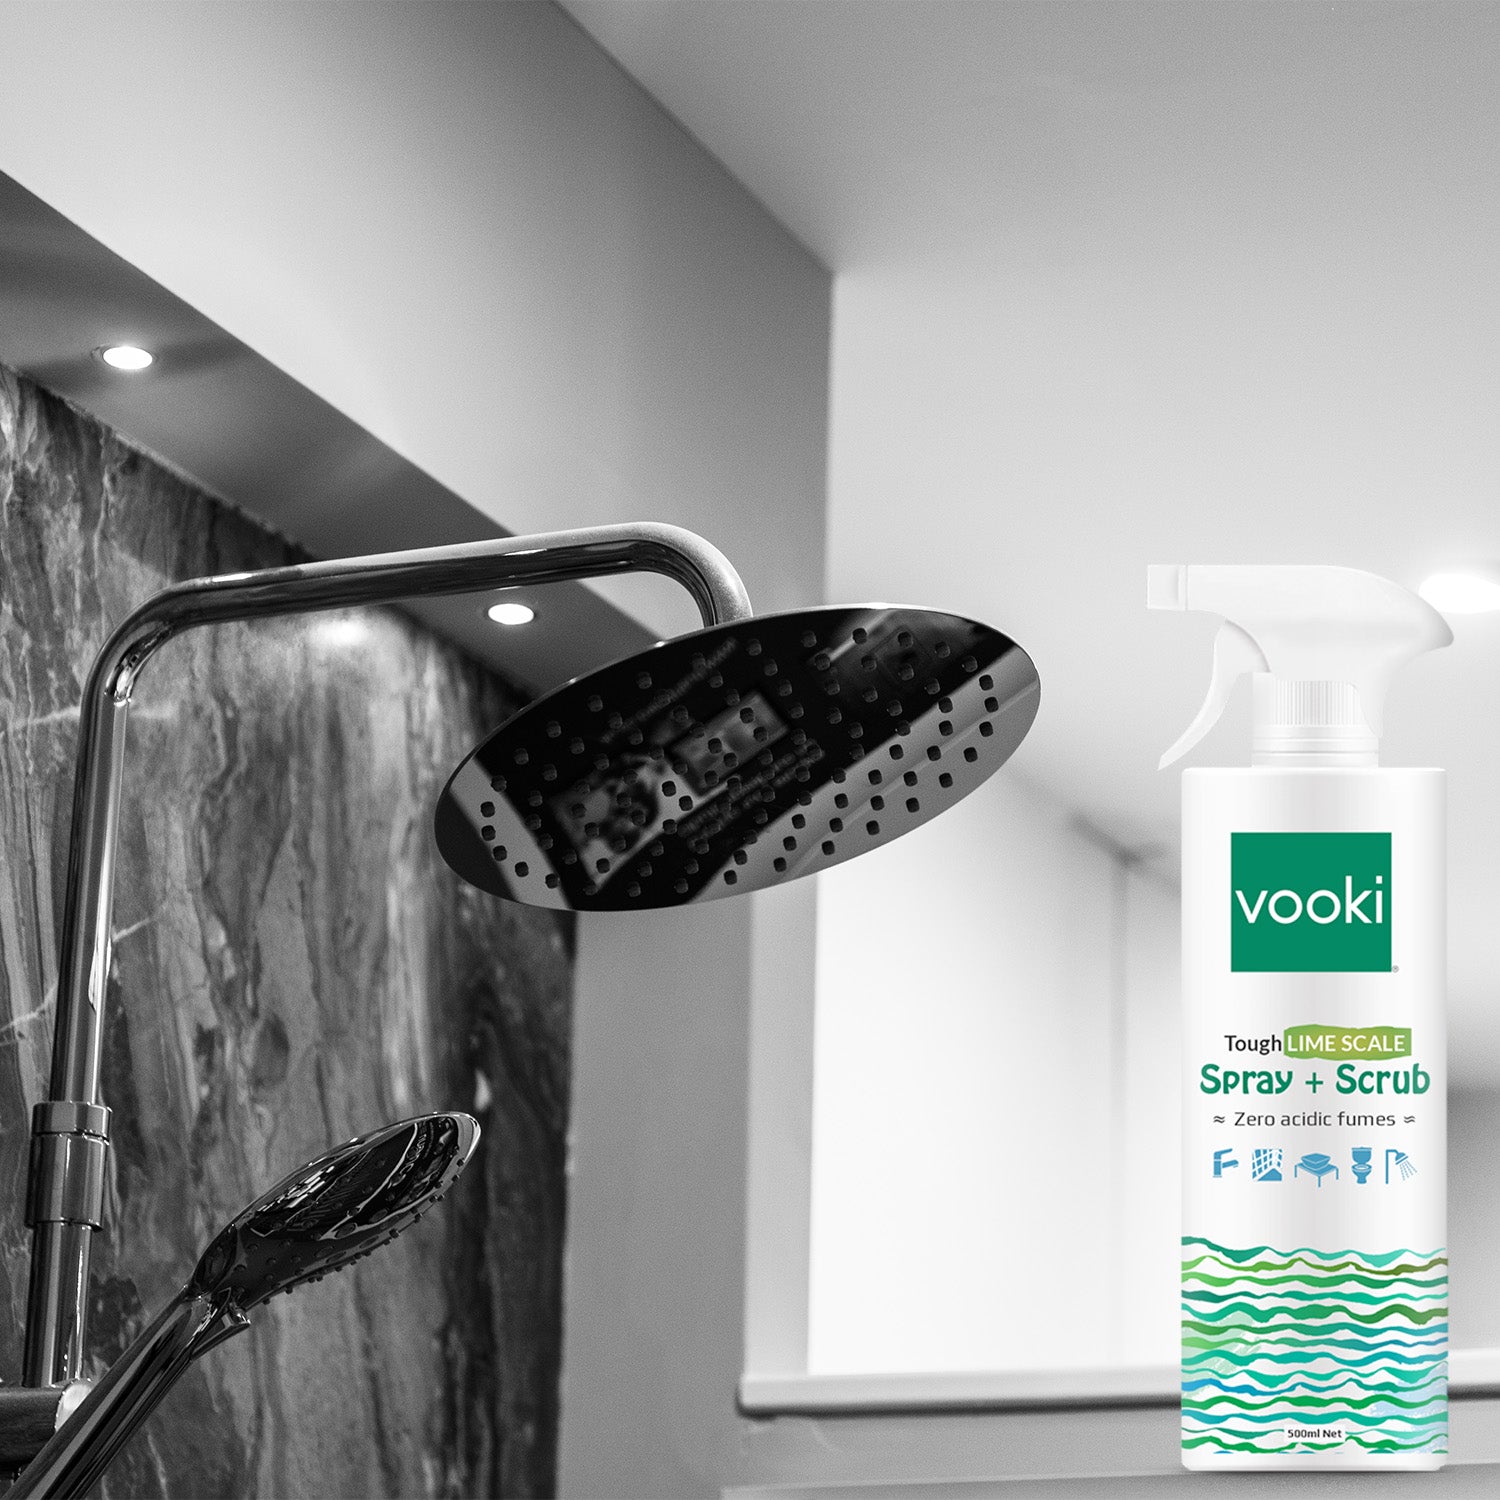 A shower head and vooki limescale spray+scrub bottle, essential for a refreshing and cleansing shower experience.